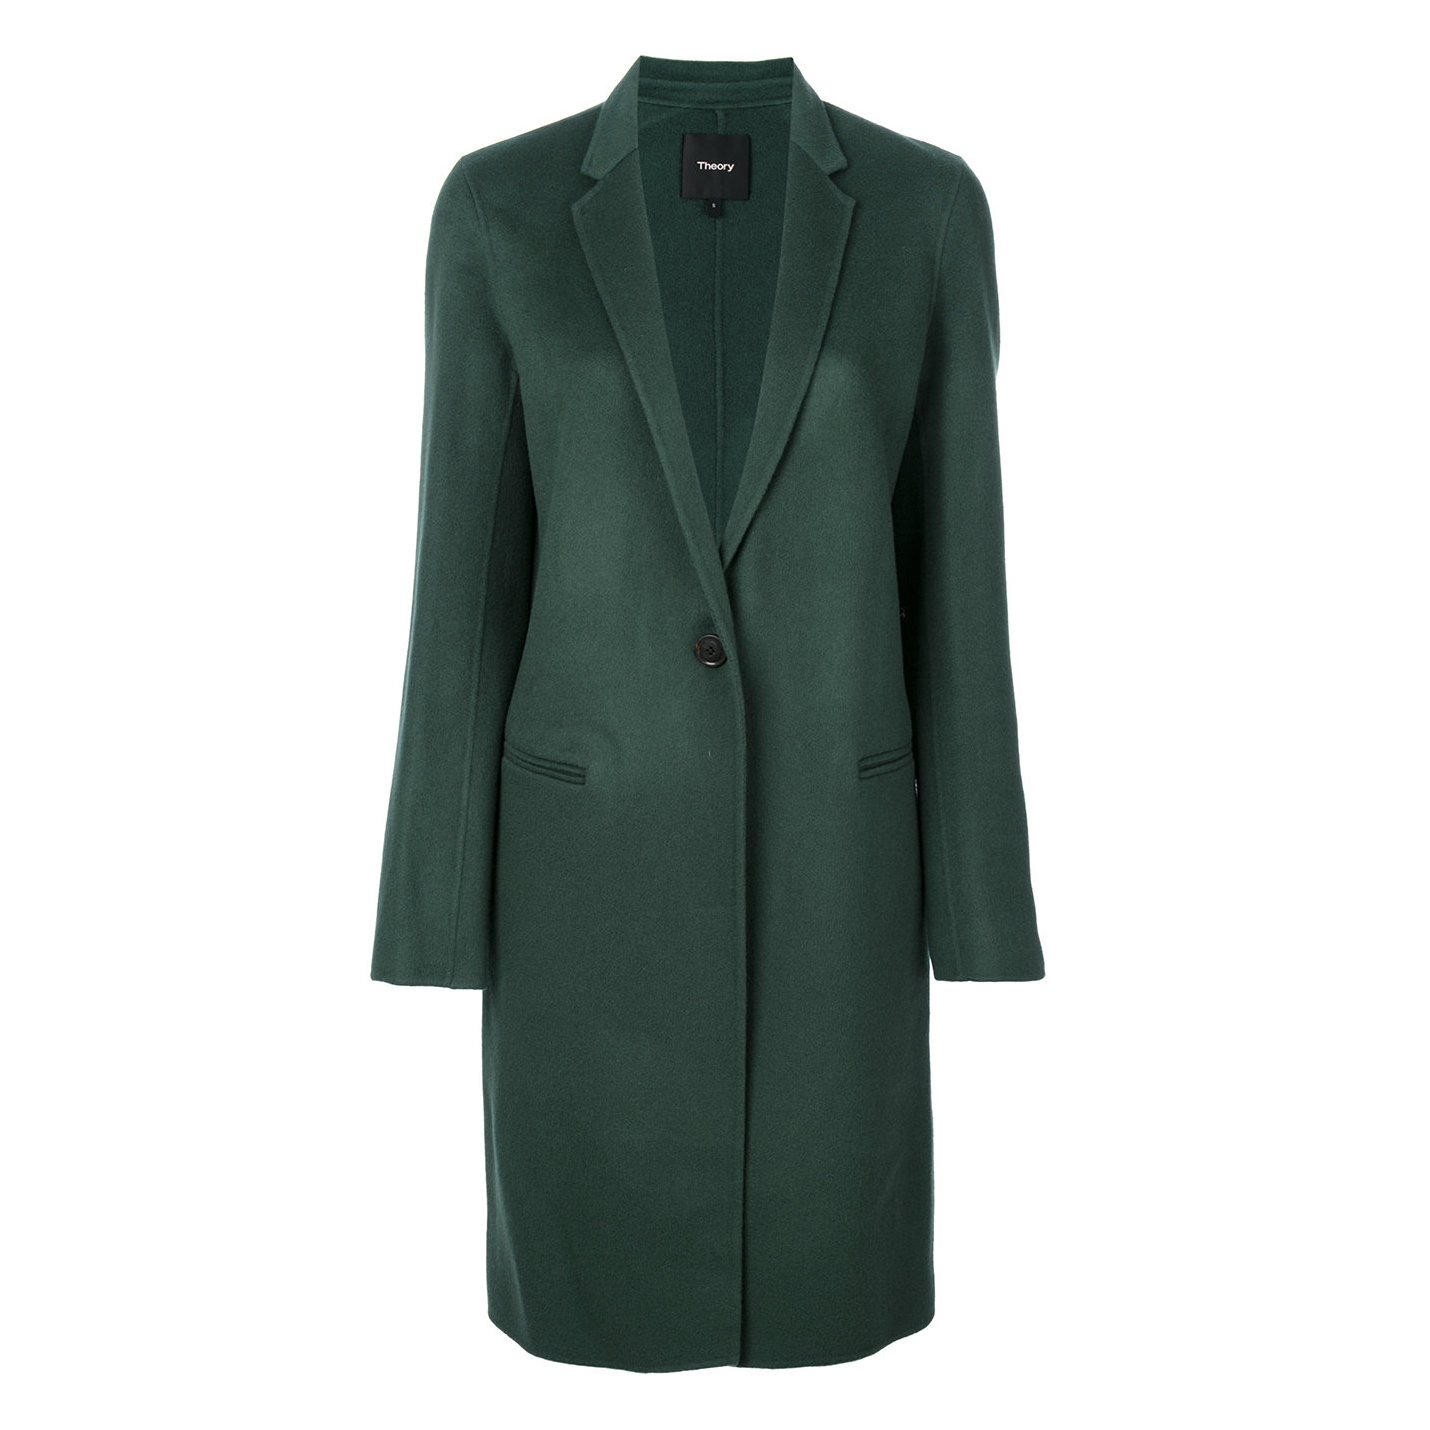 Theory Double-Faced Wool & Cashmere Essential Coat – evaChic